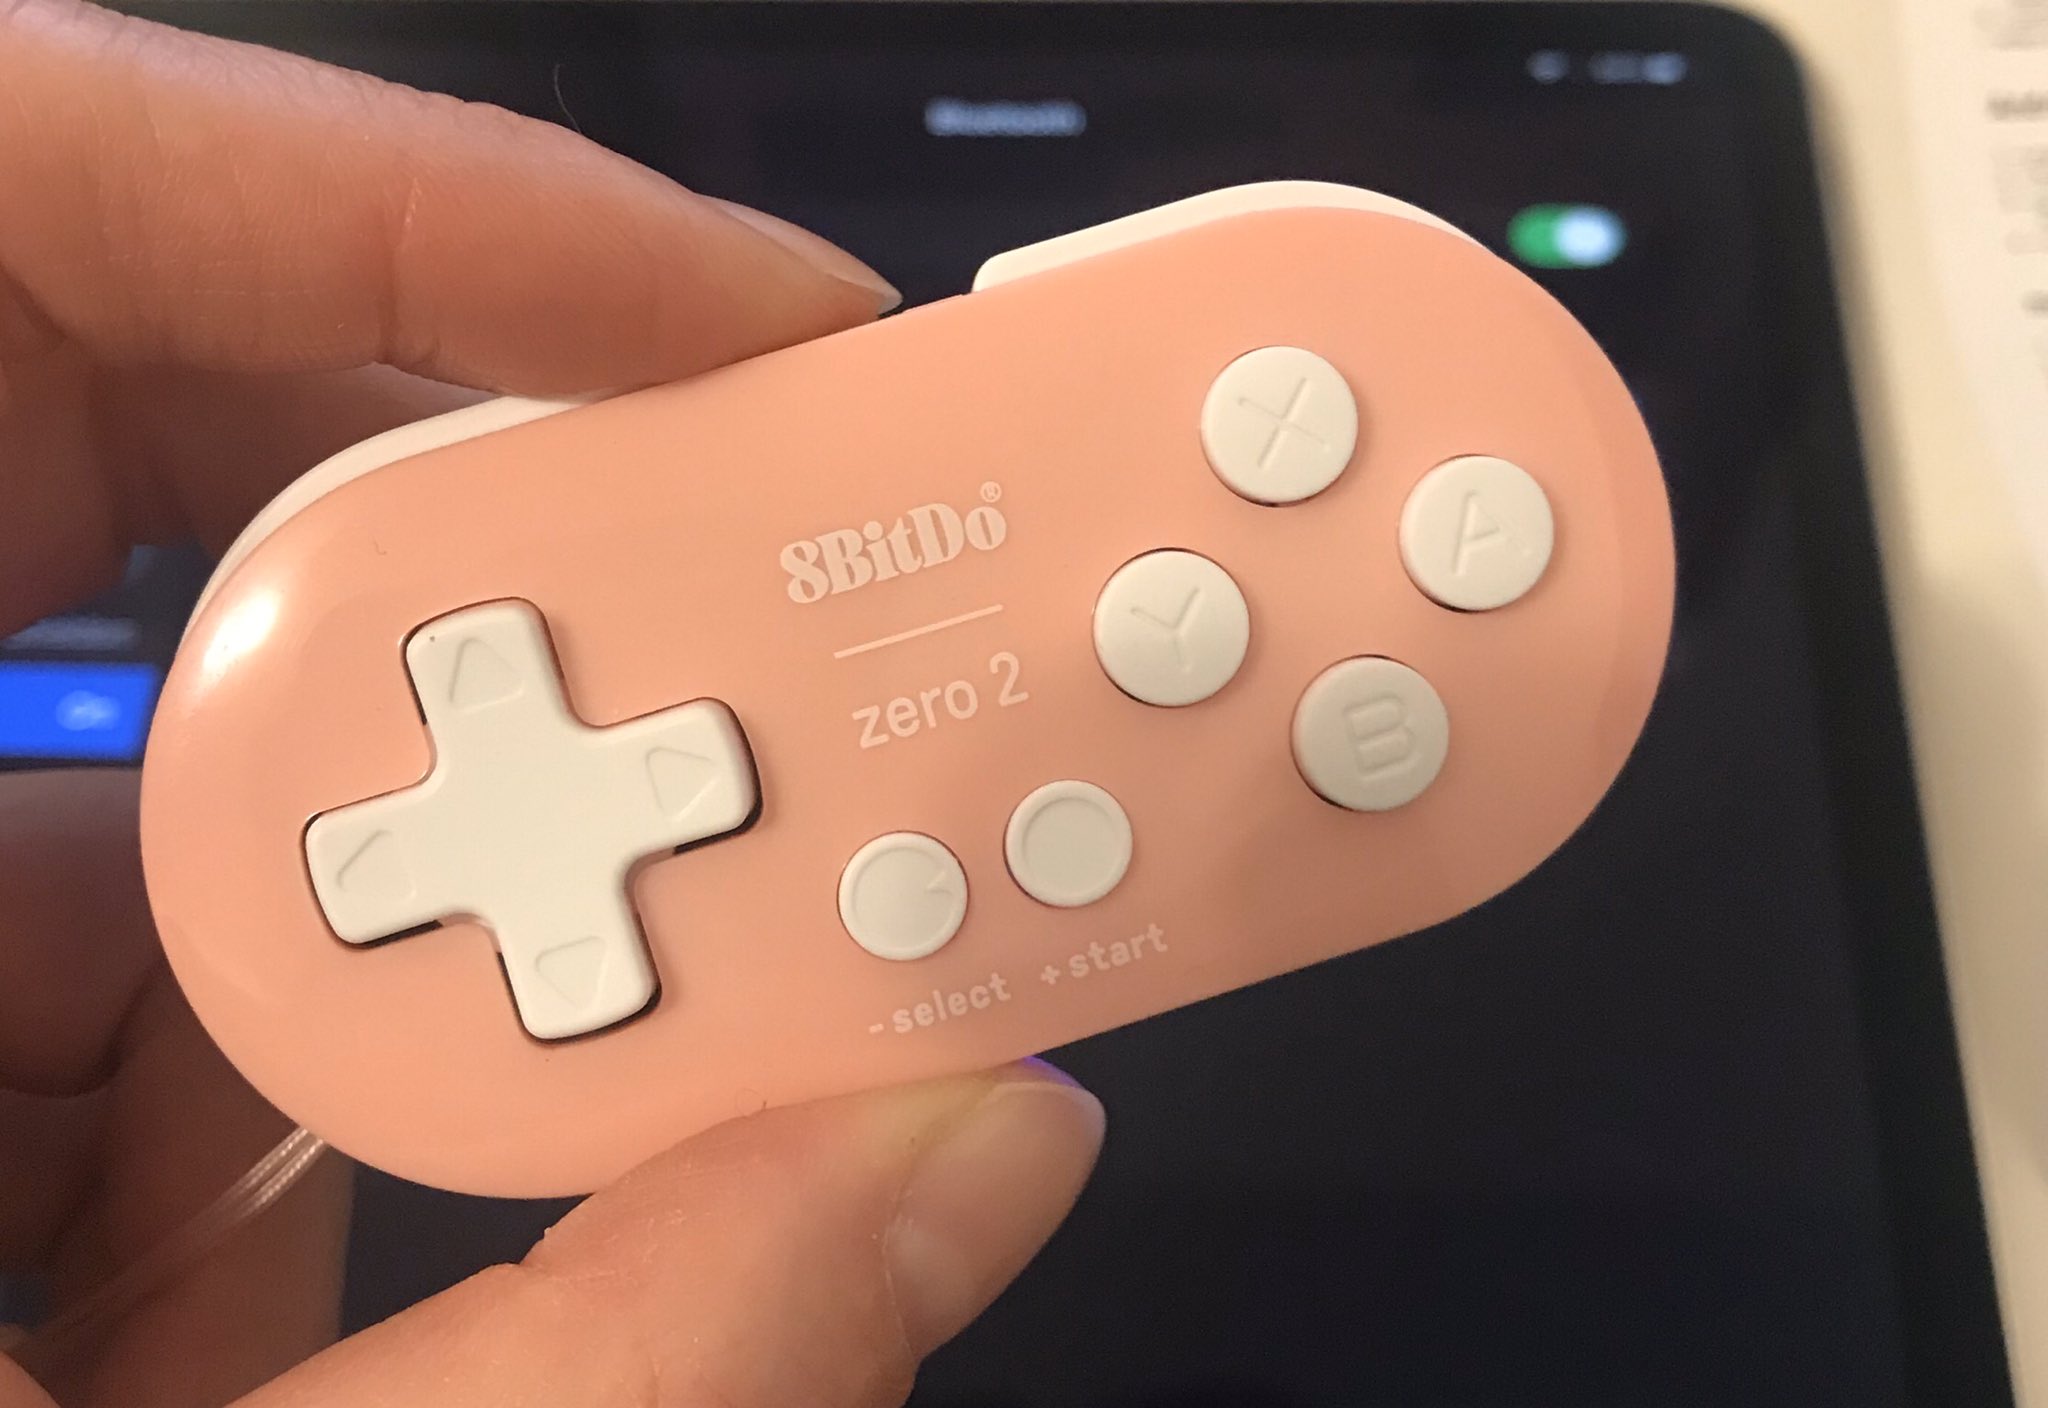 Irene Koh Update Got The 8bitdo Zero2 To See If It Works The Same It S Follow The Instructions For Keyboard Mode Pairing Start R Then Hold Select Until